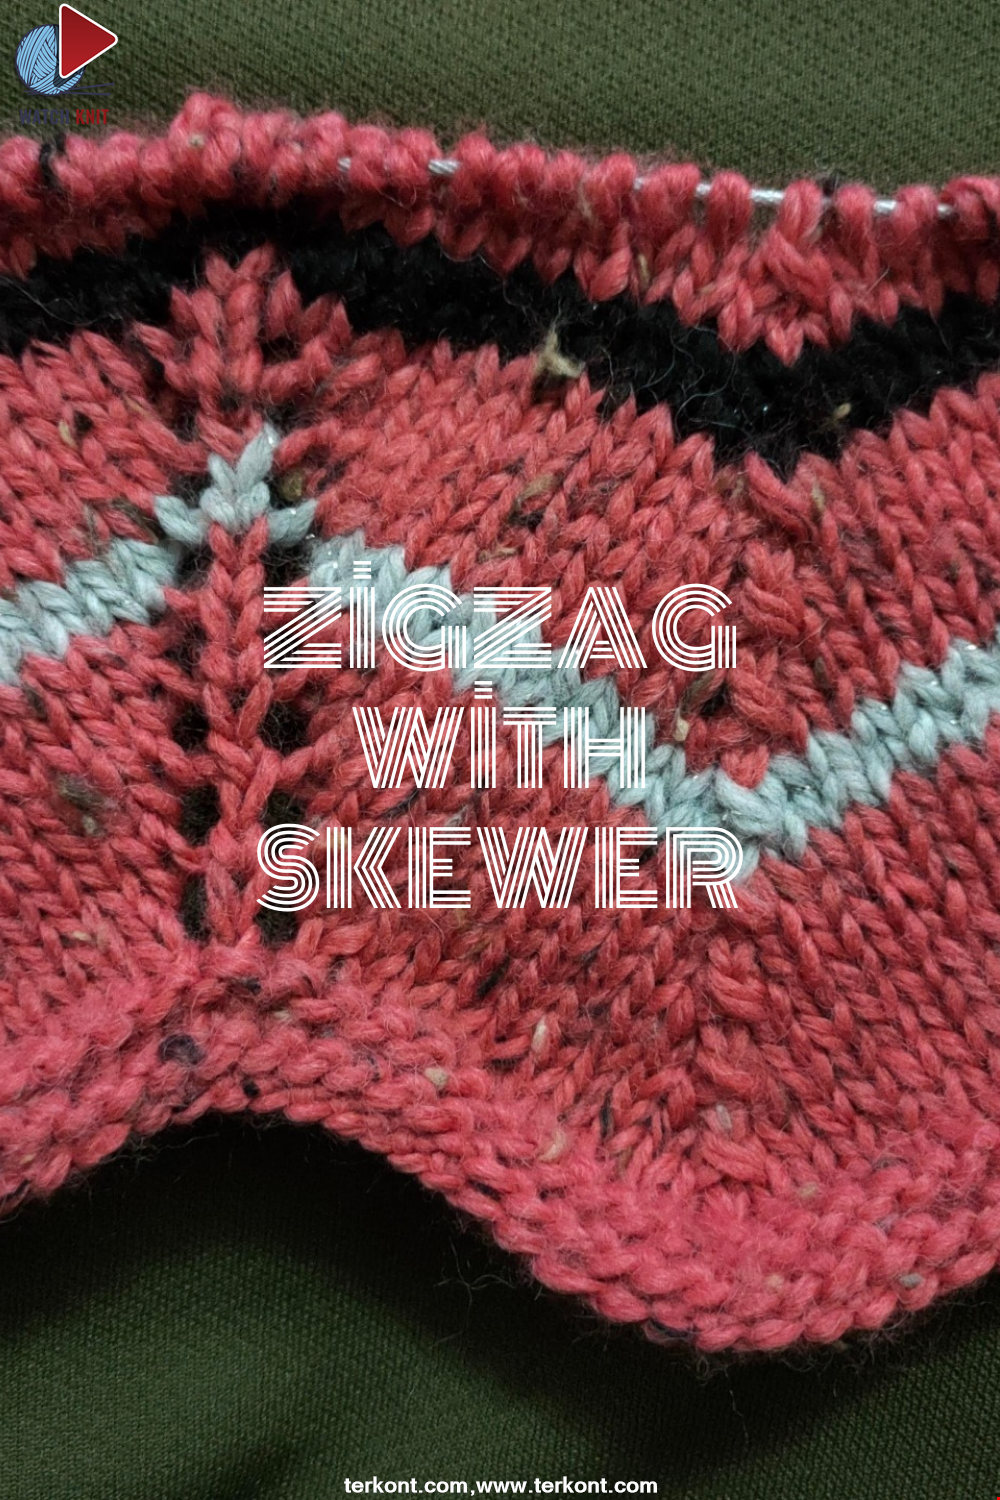 Making a Zigzag Model with a Skewer